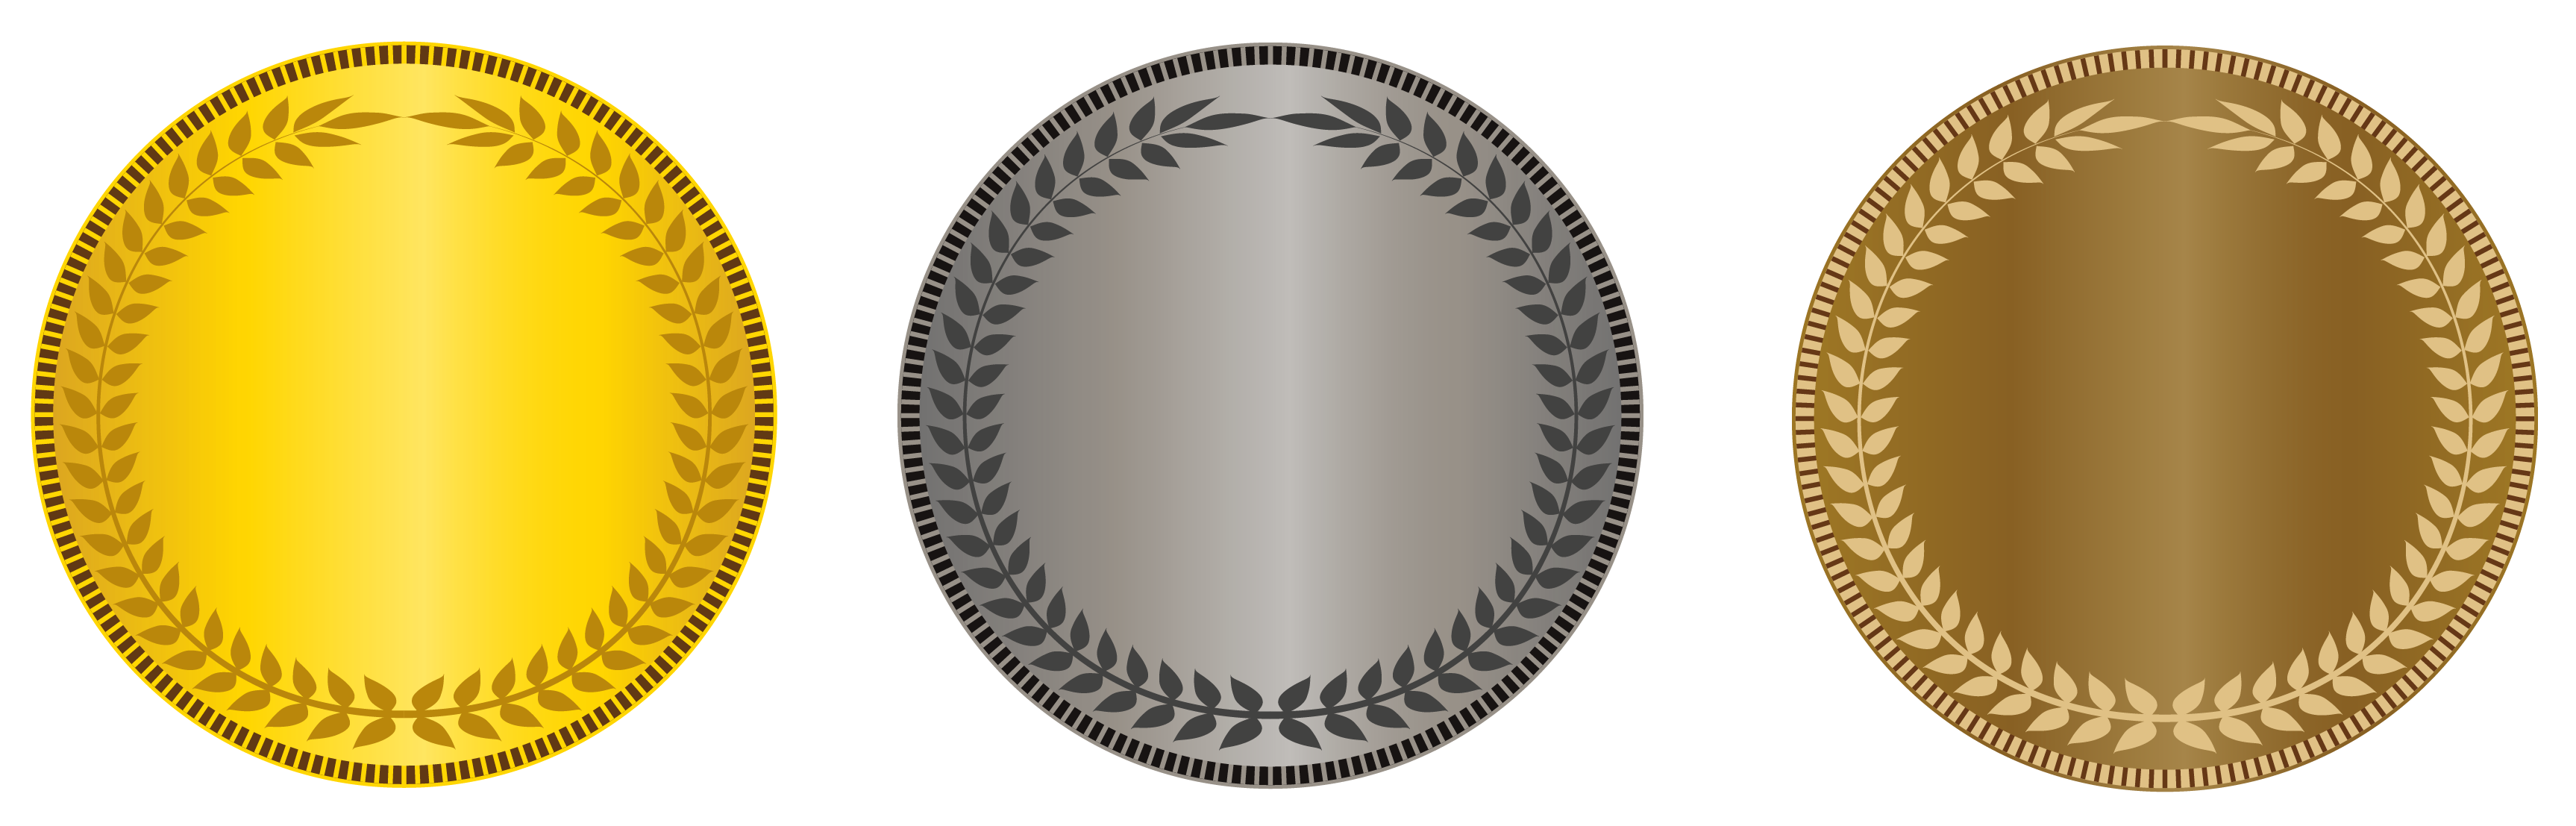 Transparent Gold Silver Bronze Medals Png Picture Gallery Yopriceville High Quality Images And Transparent Png Free Clipart